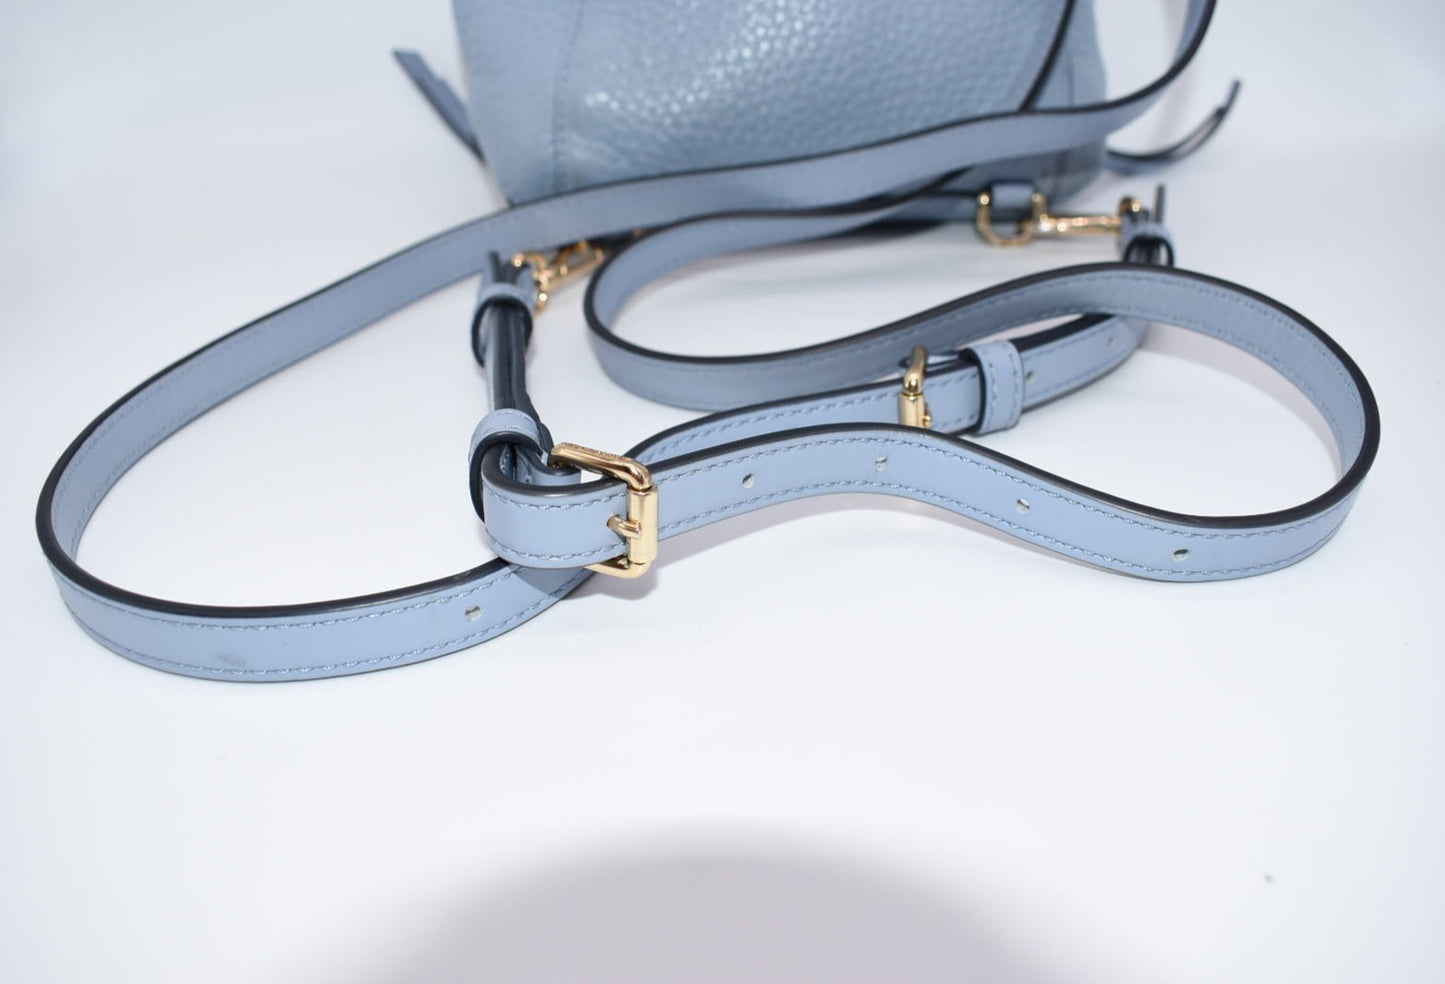 Michael Kors Viv Extra-Small Pebbled Leather Backpack in Baby Blue